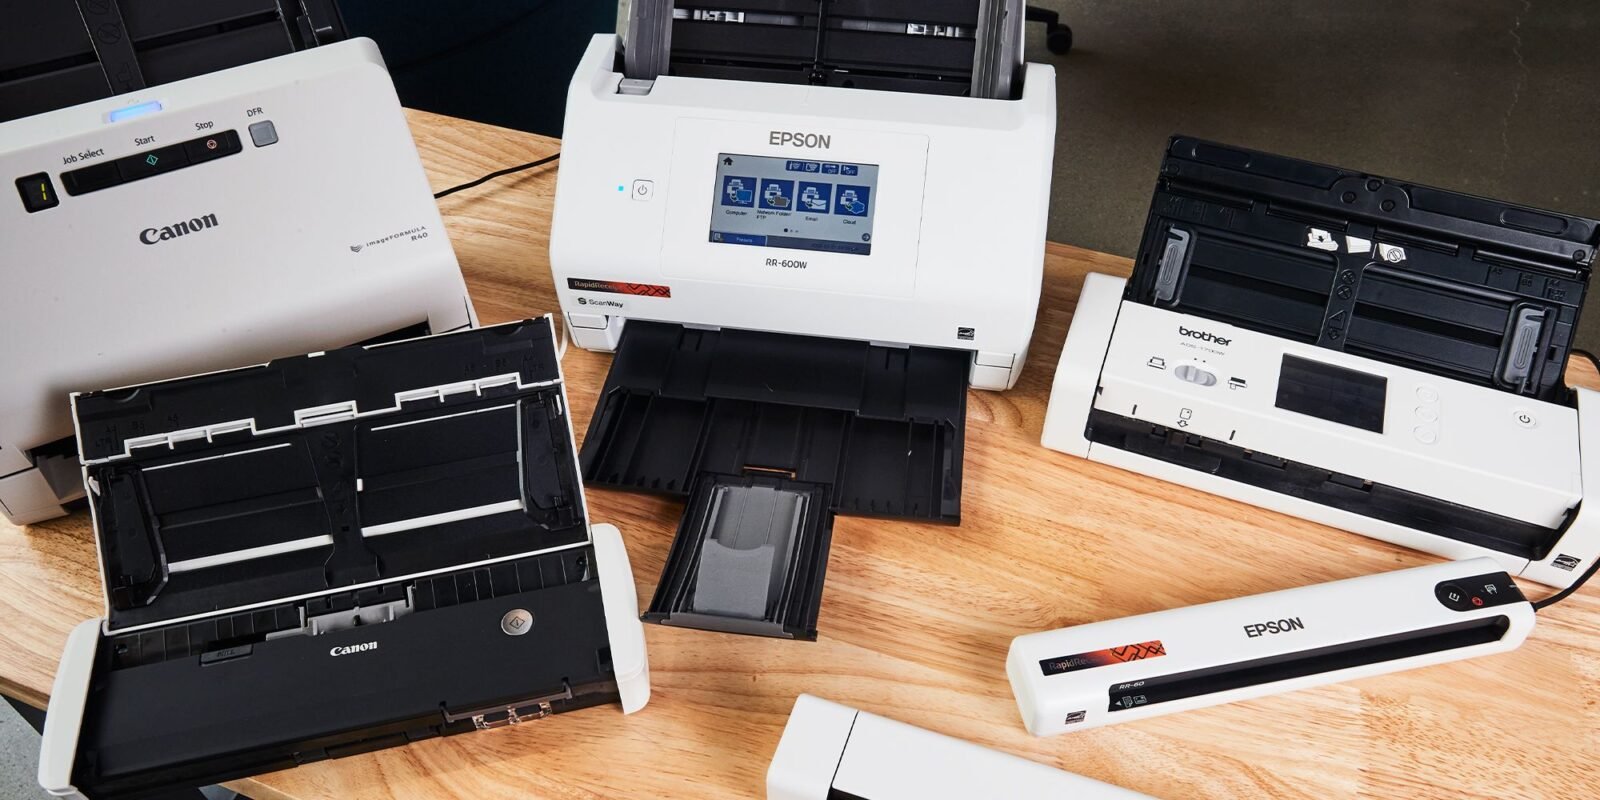 A diverse array of scanners, including models from Epson, Canon and Brother.